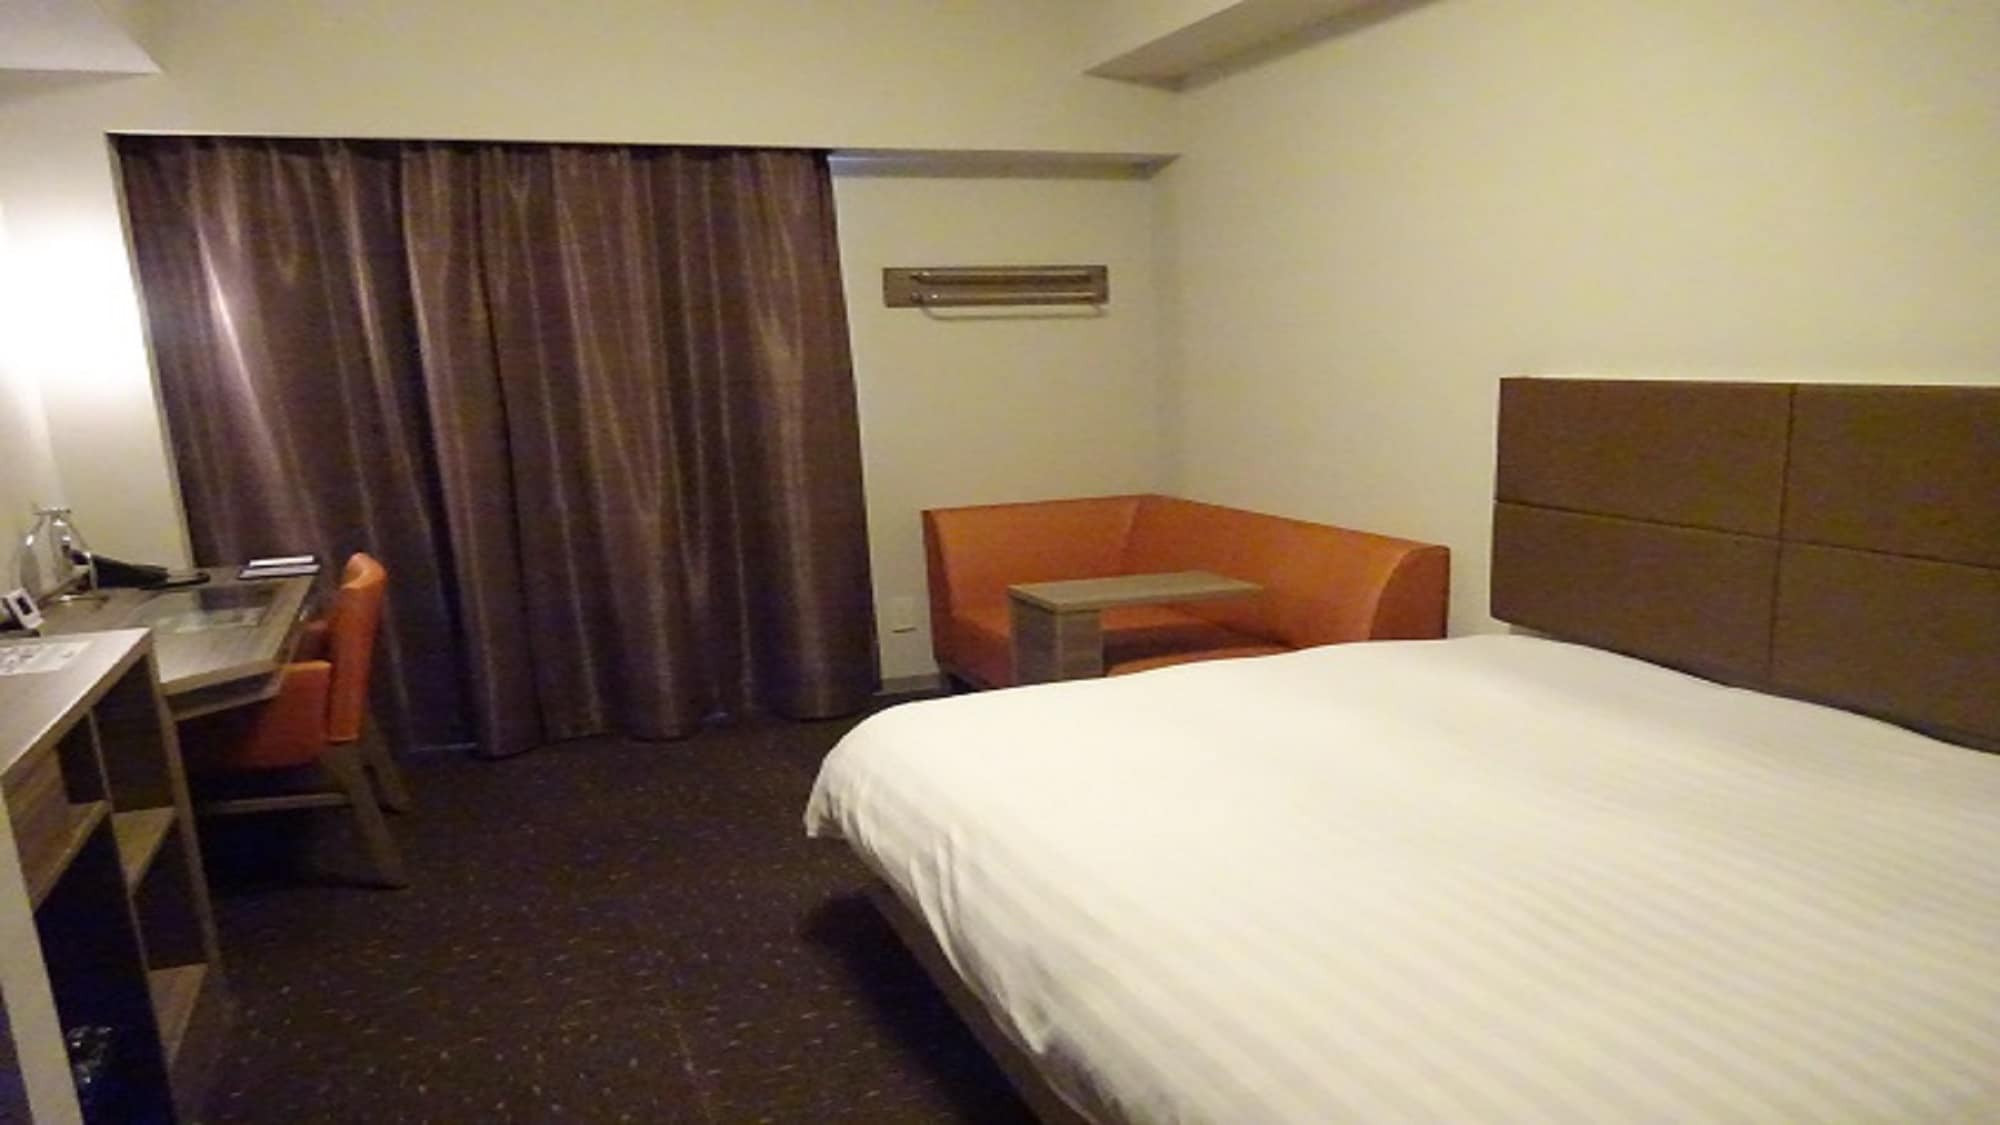 ■ Deluxe Double Room 18.1㎡ [Bed size 140cm & times; 205cm]